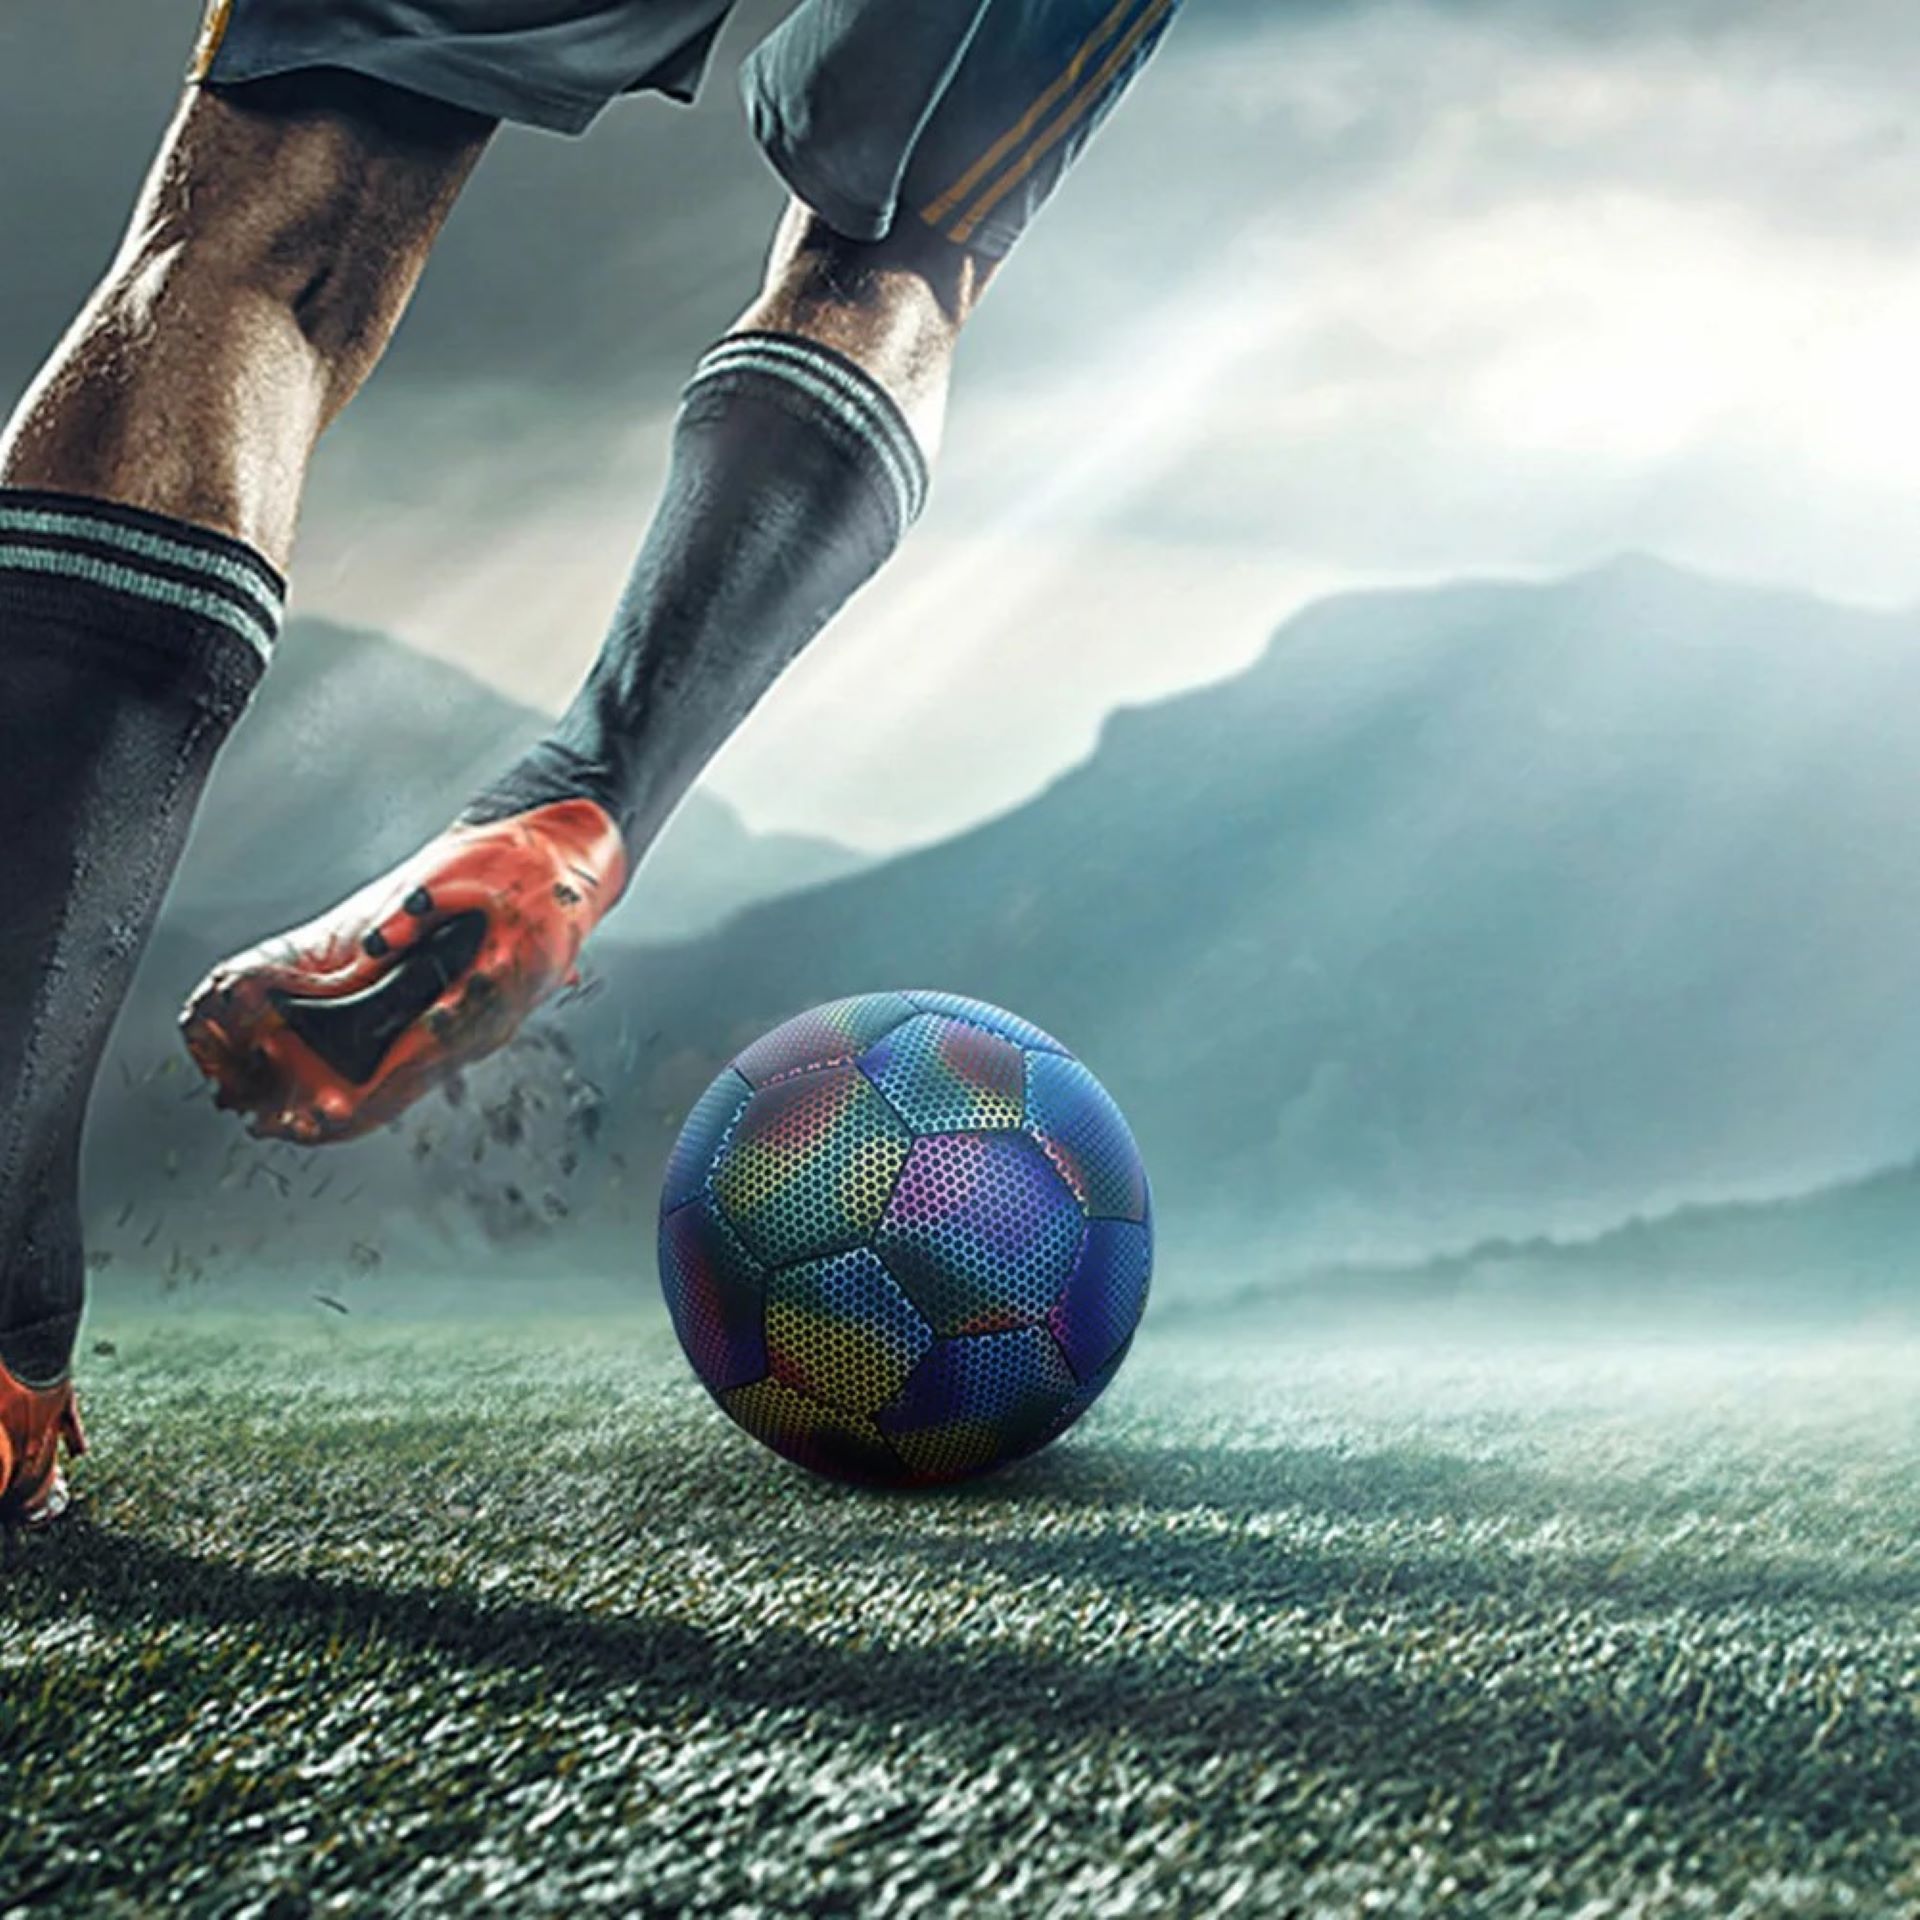 Soccer ball and player's feet